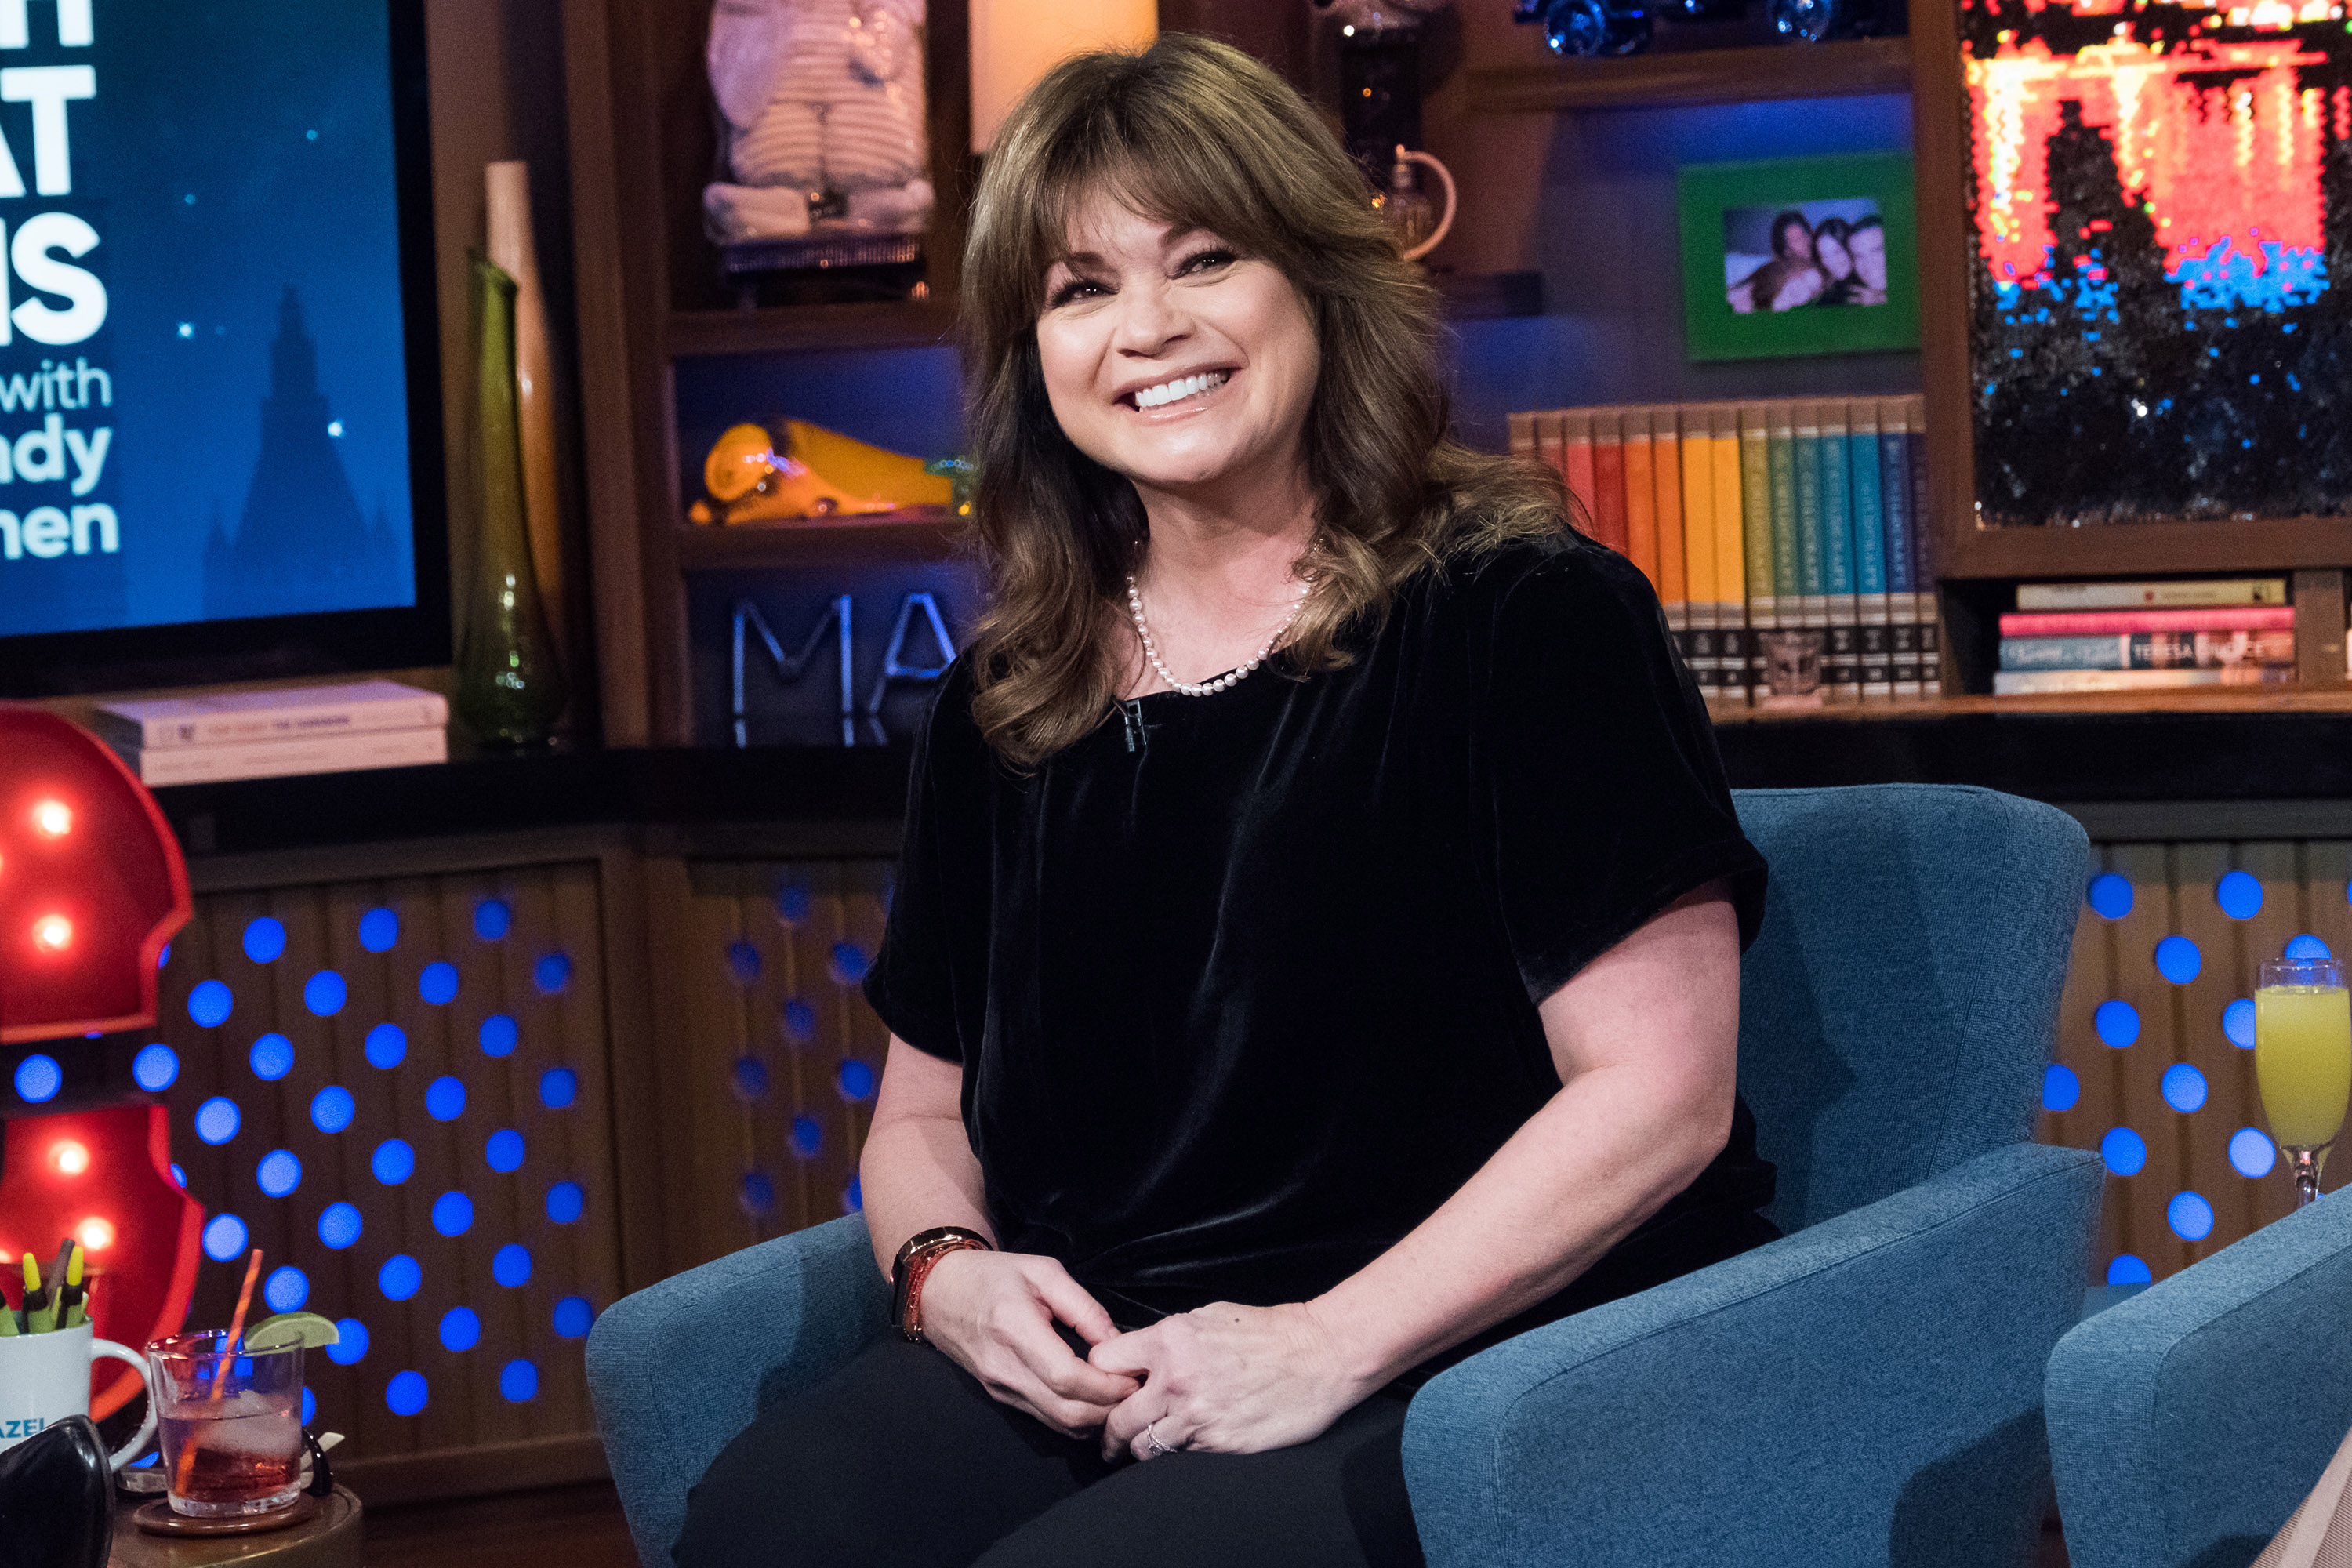 Valerie Bertinelli bei "Watch What Happens Live With Andy Cohen" am 18. Oktober 2017. | Quelle: Getty Images